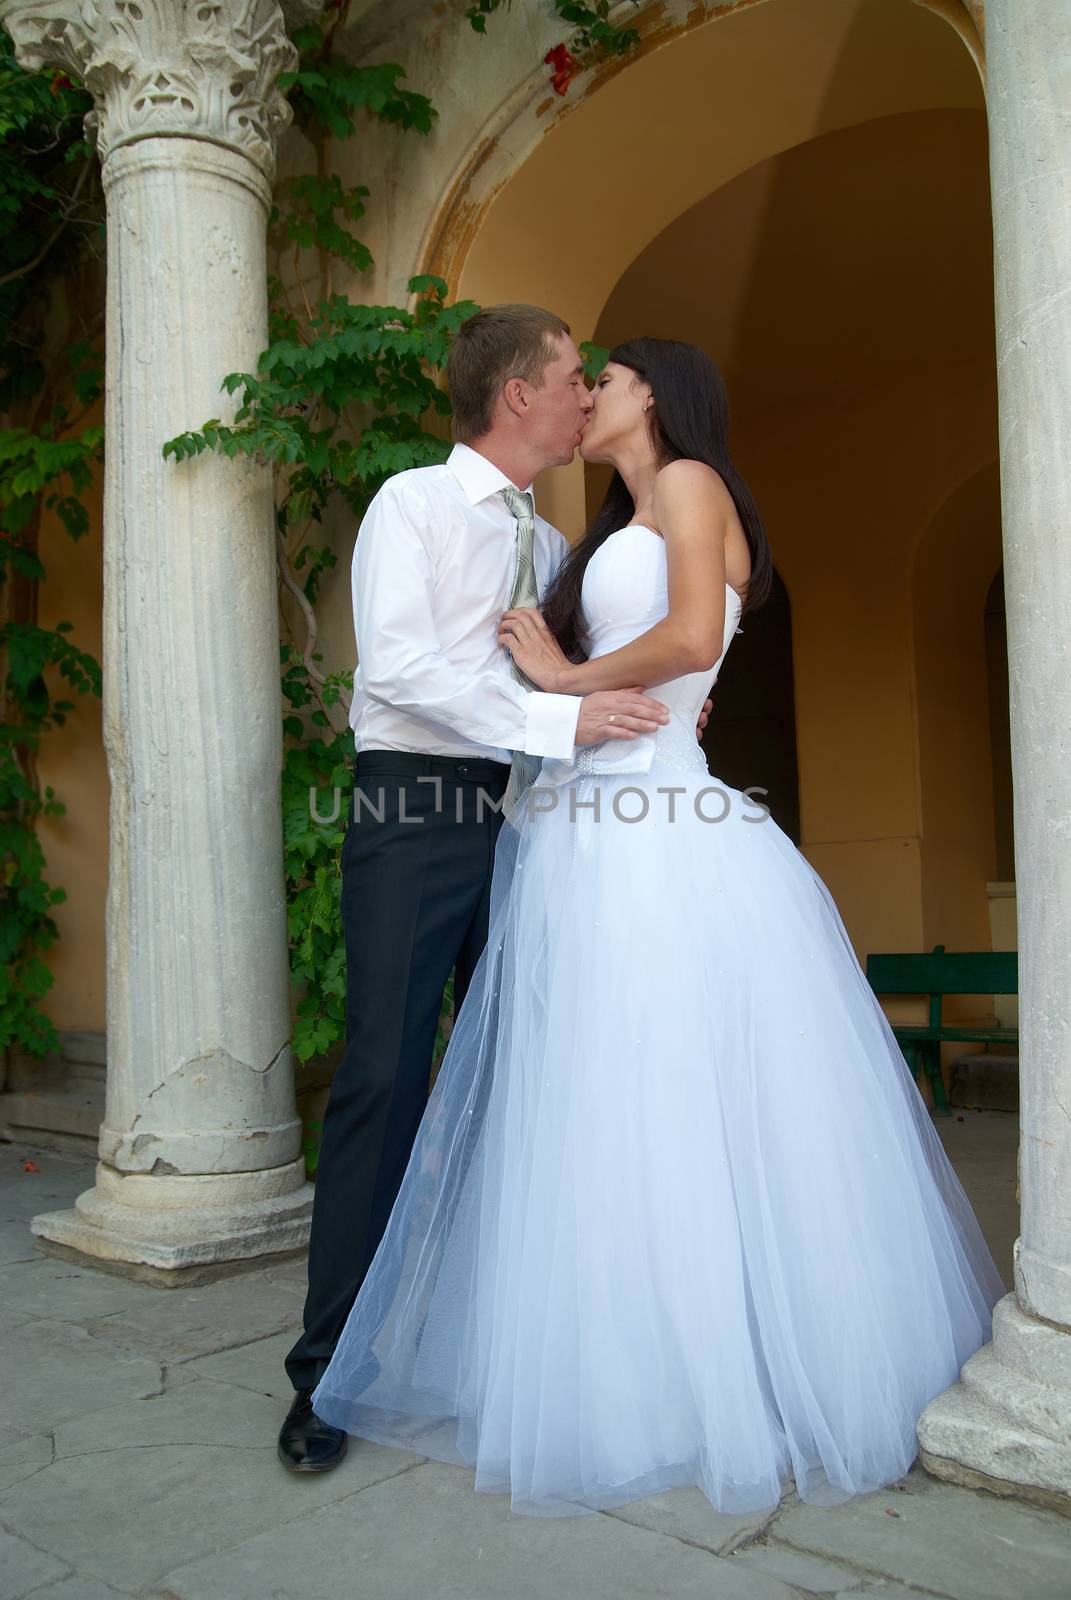 Beautiful wedding couple- kissing bride and groom. Just married